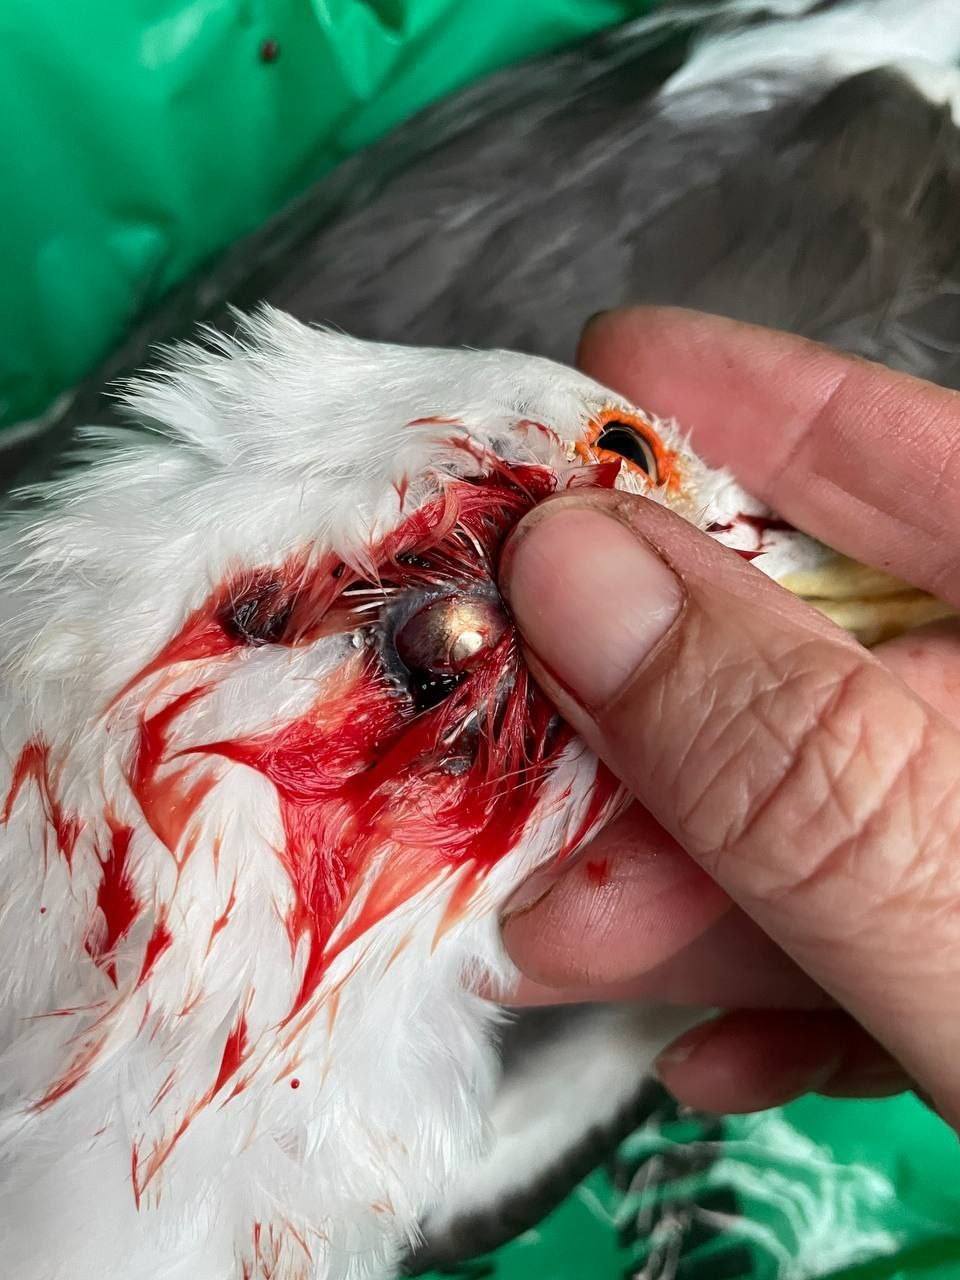 SSPCA inspectors found a gull that had been shot dead with a ball bearing to the head.